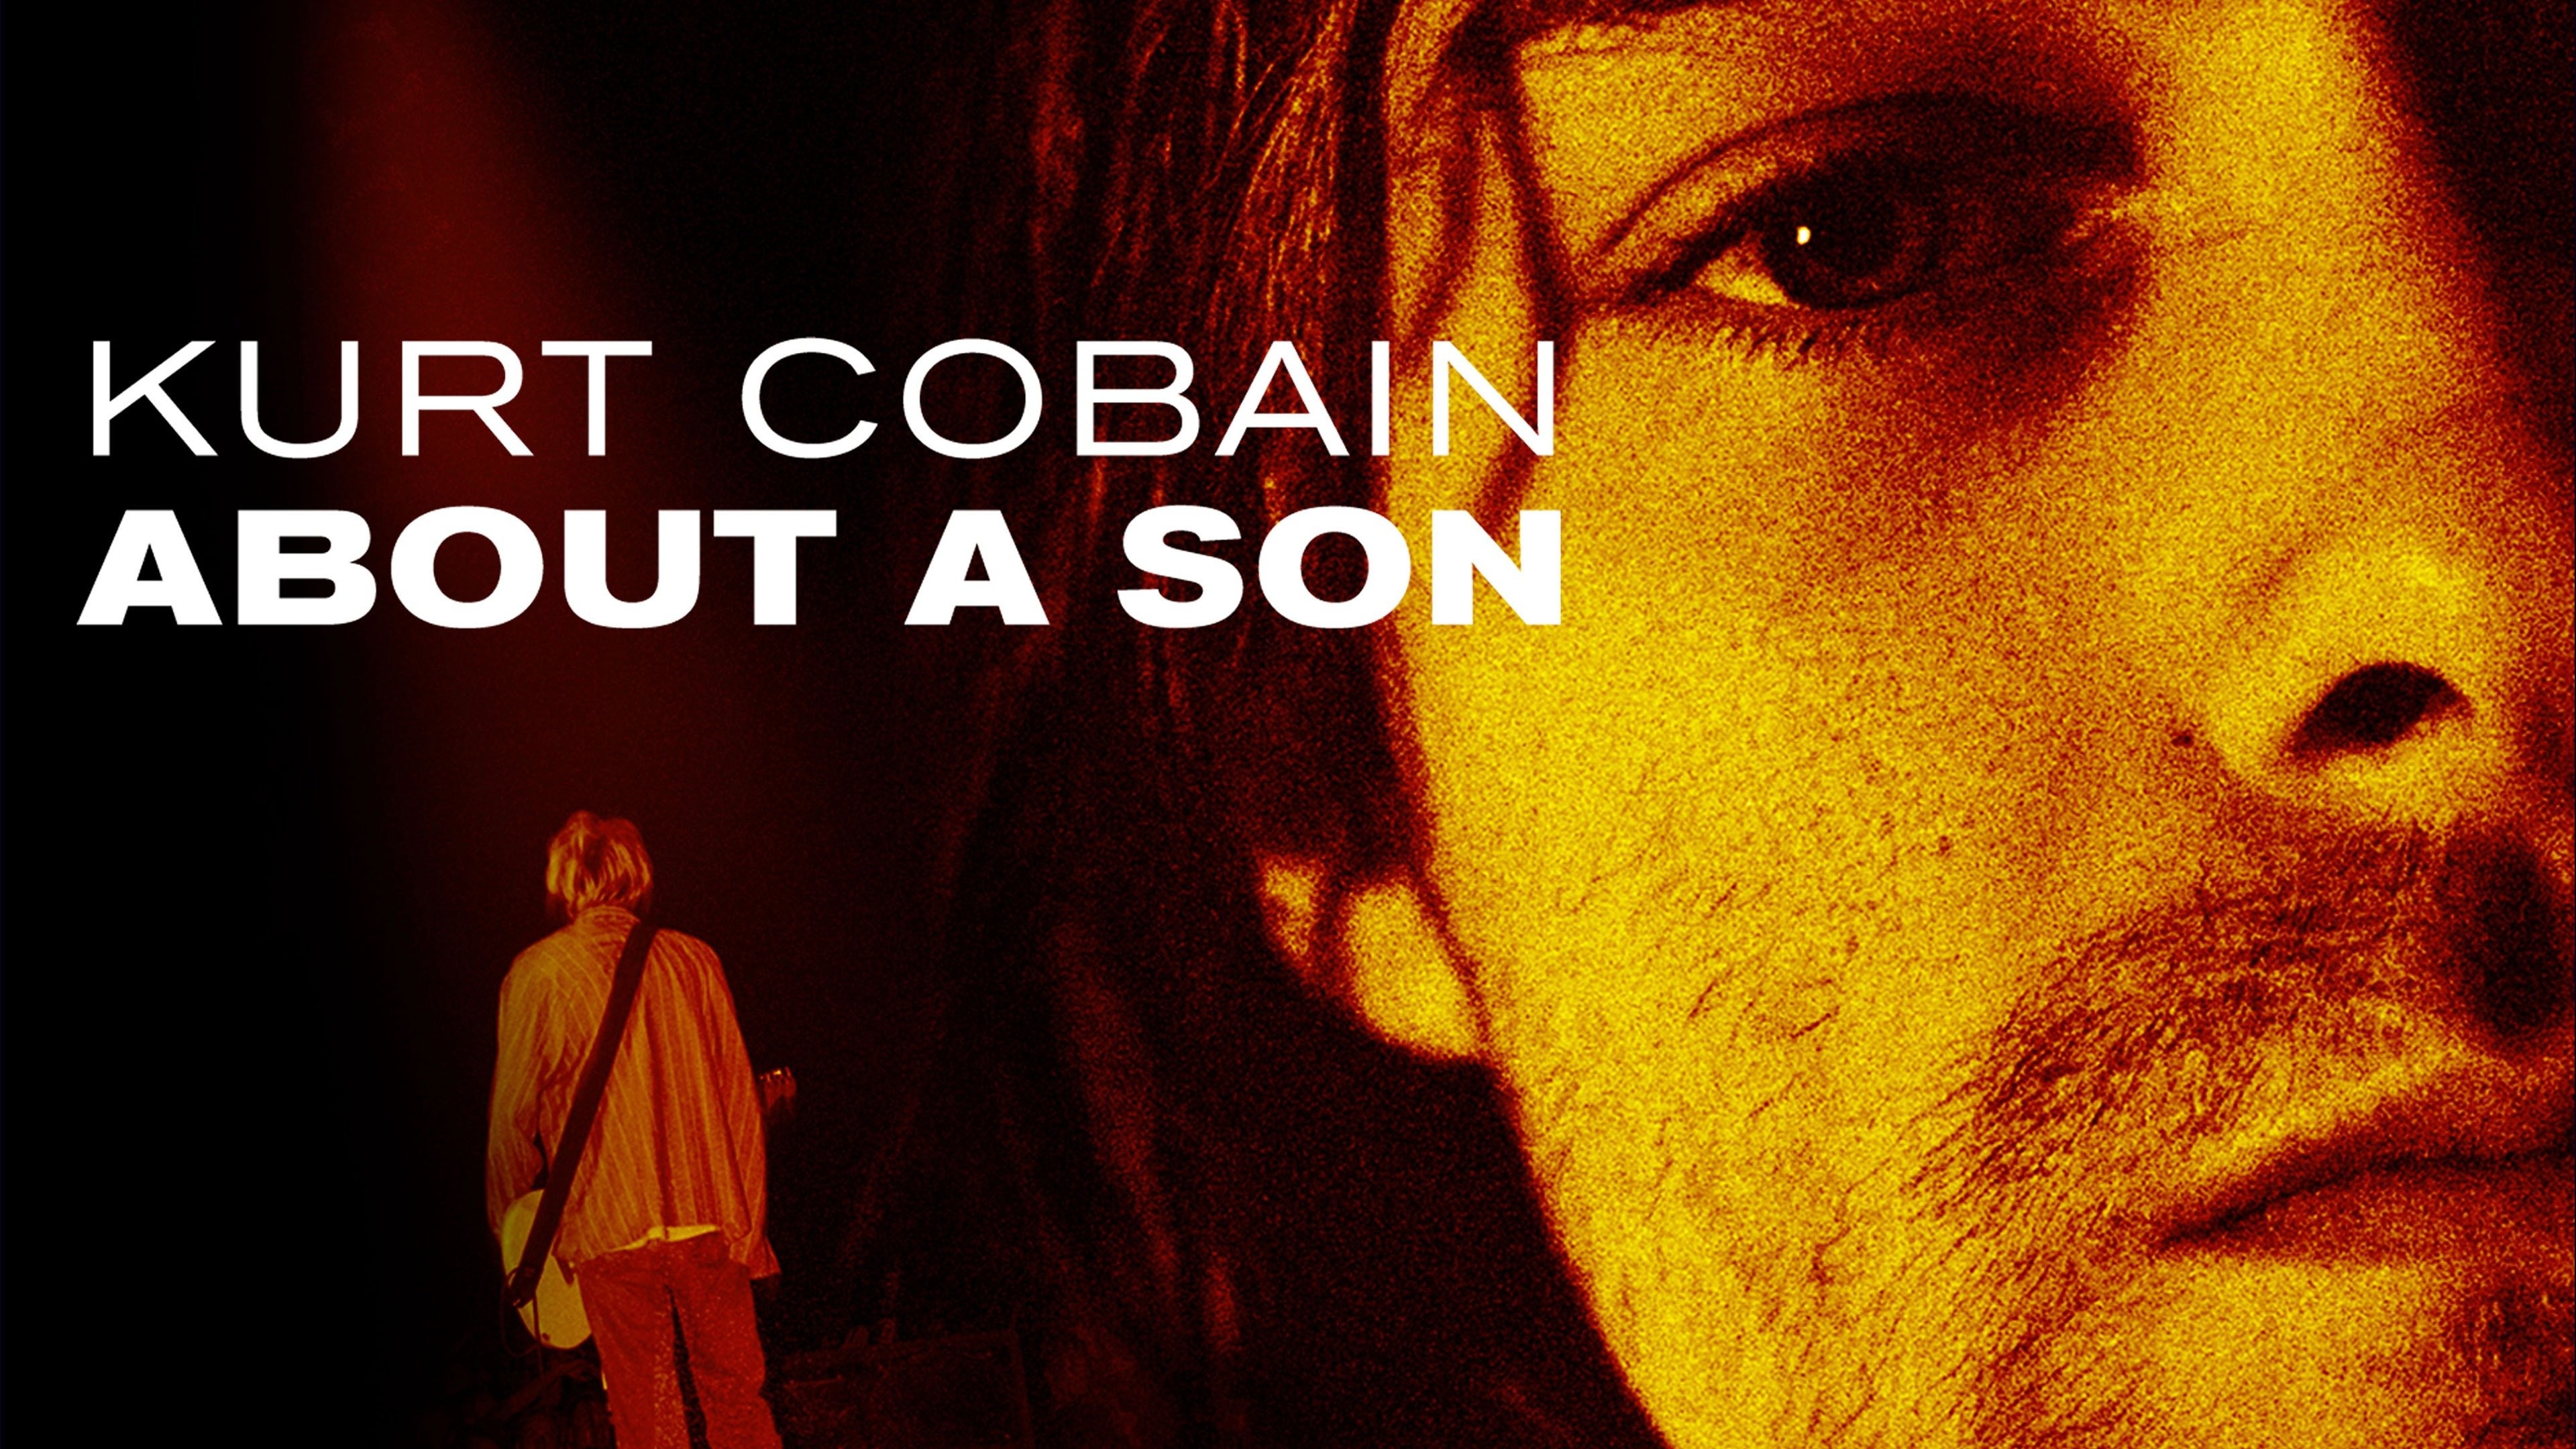 Kurt Cobain About a Son - Rotten Tomatoes